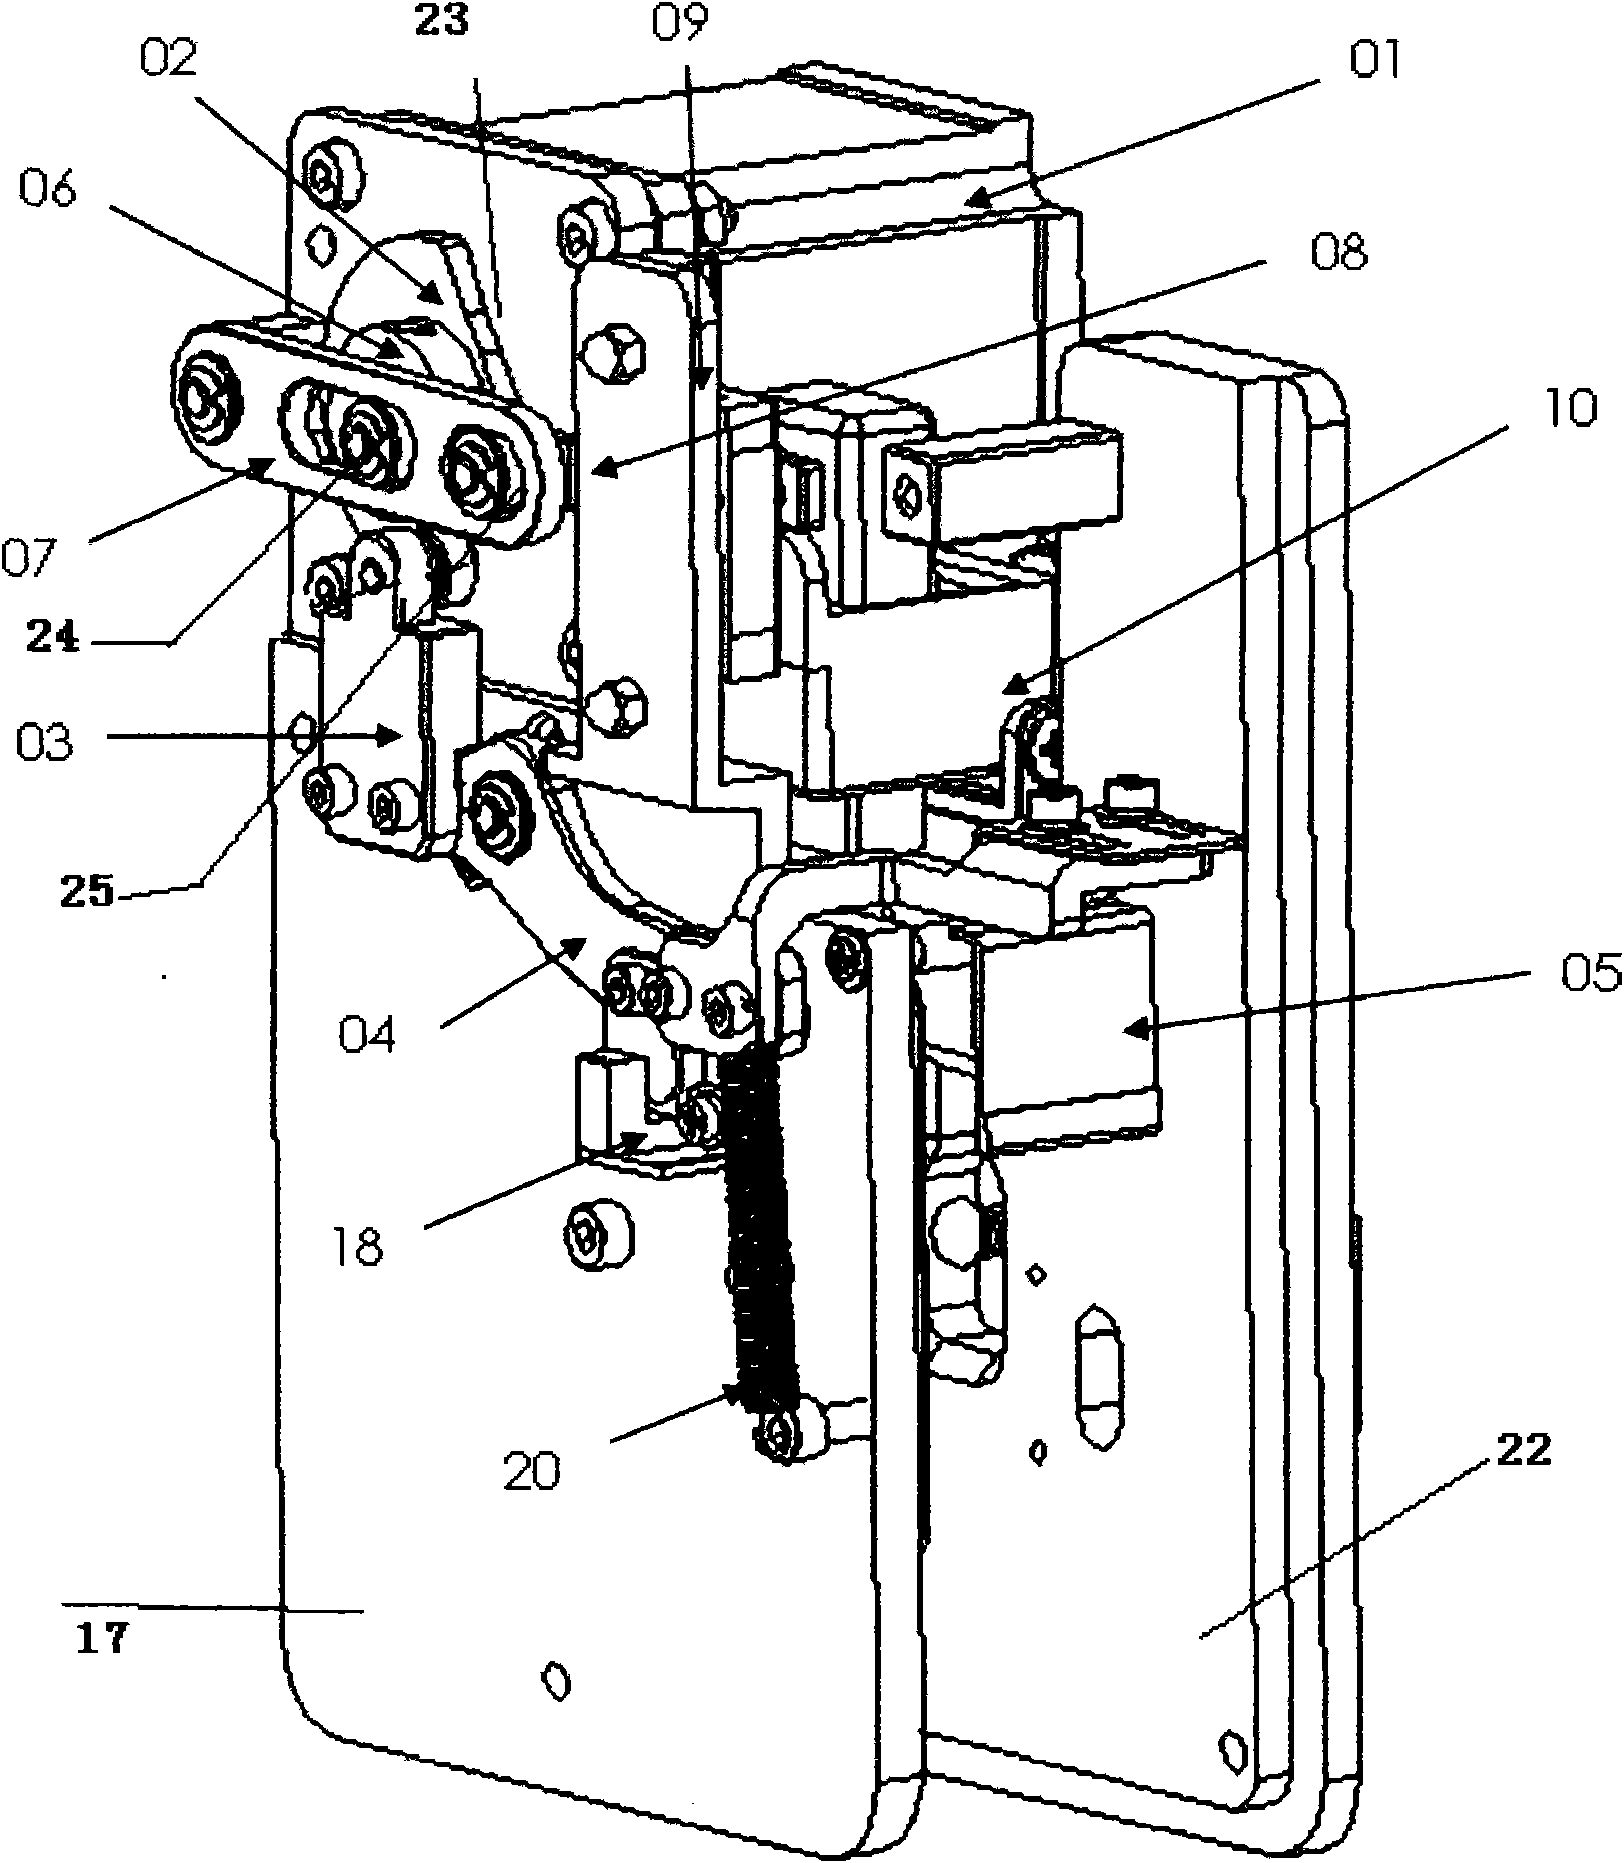 Mechanism for affixing seal on bank note bundle